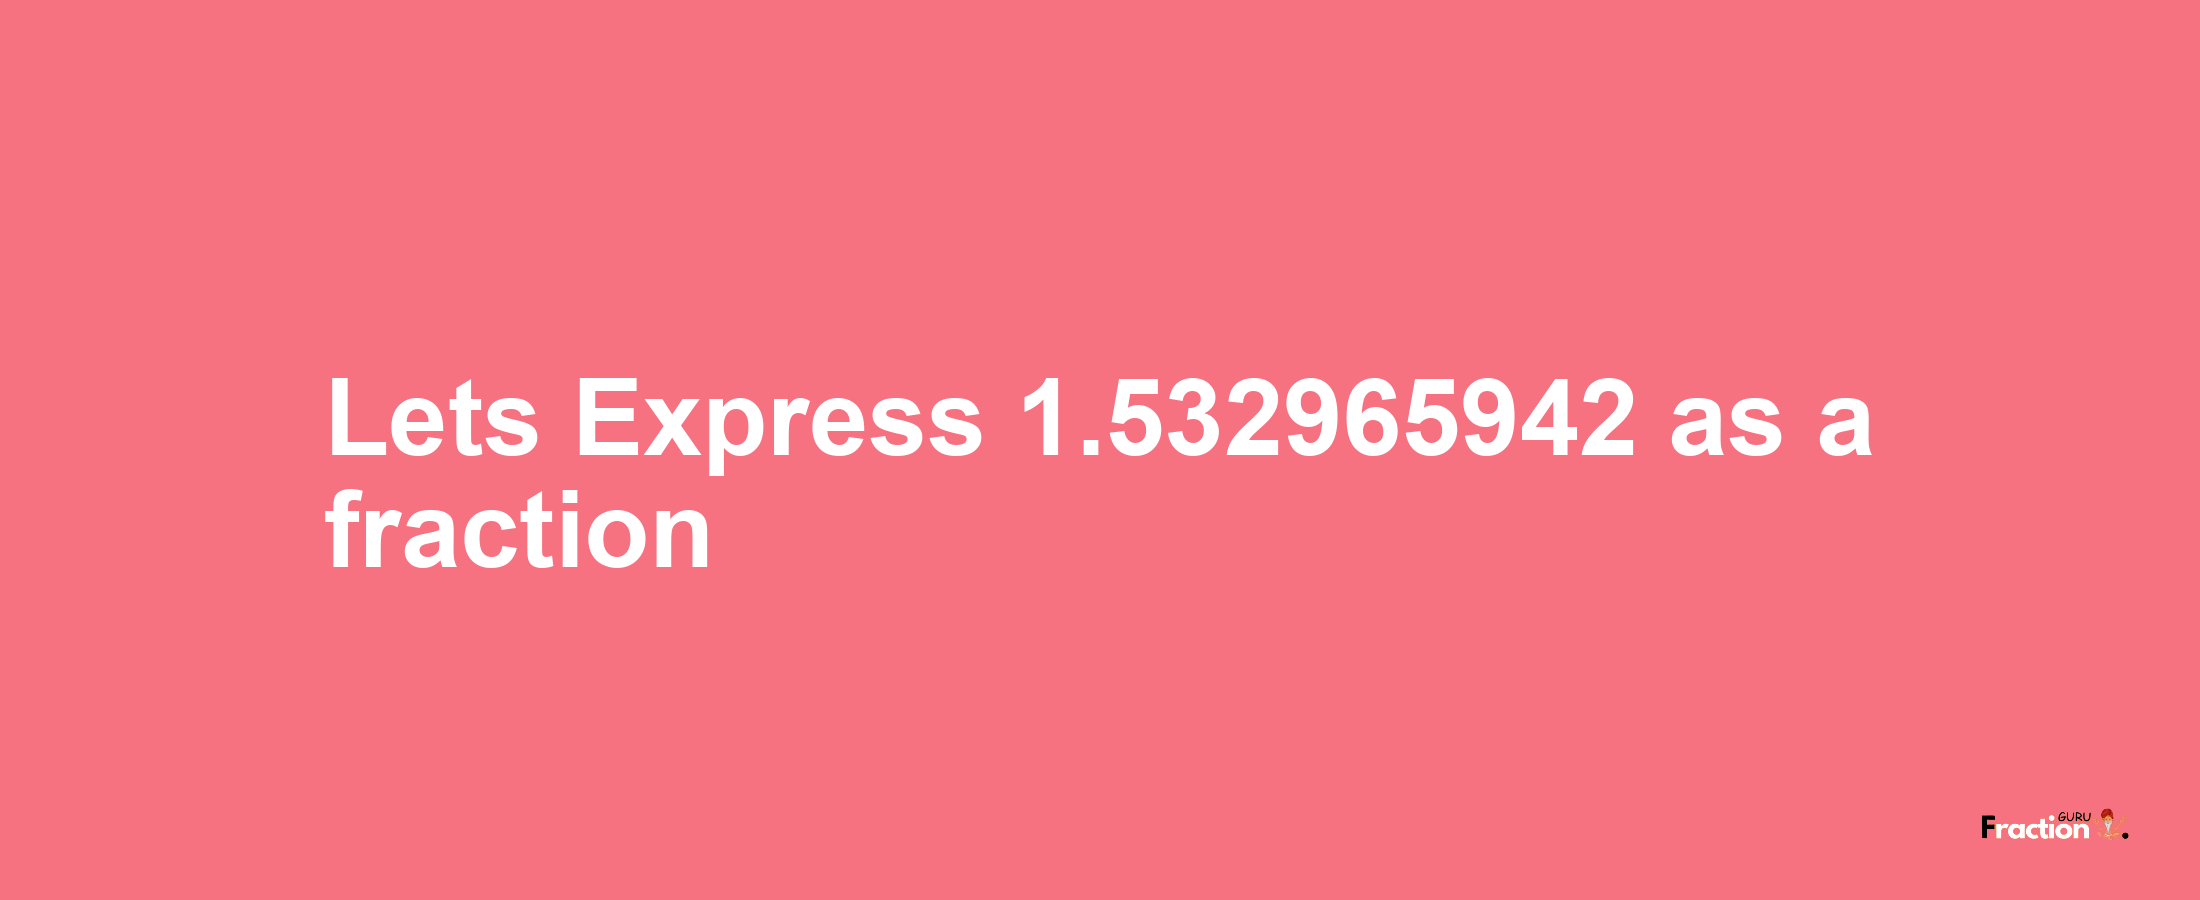 Lets Express 1.532965942 as afraction